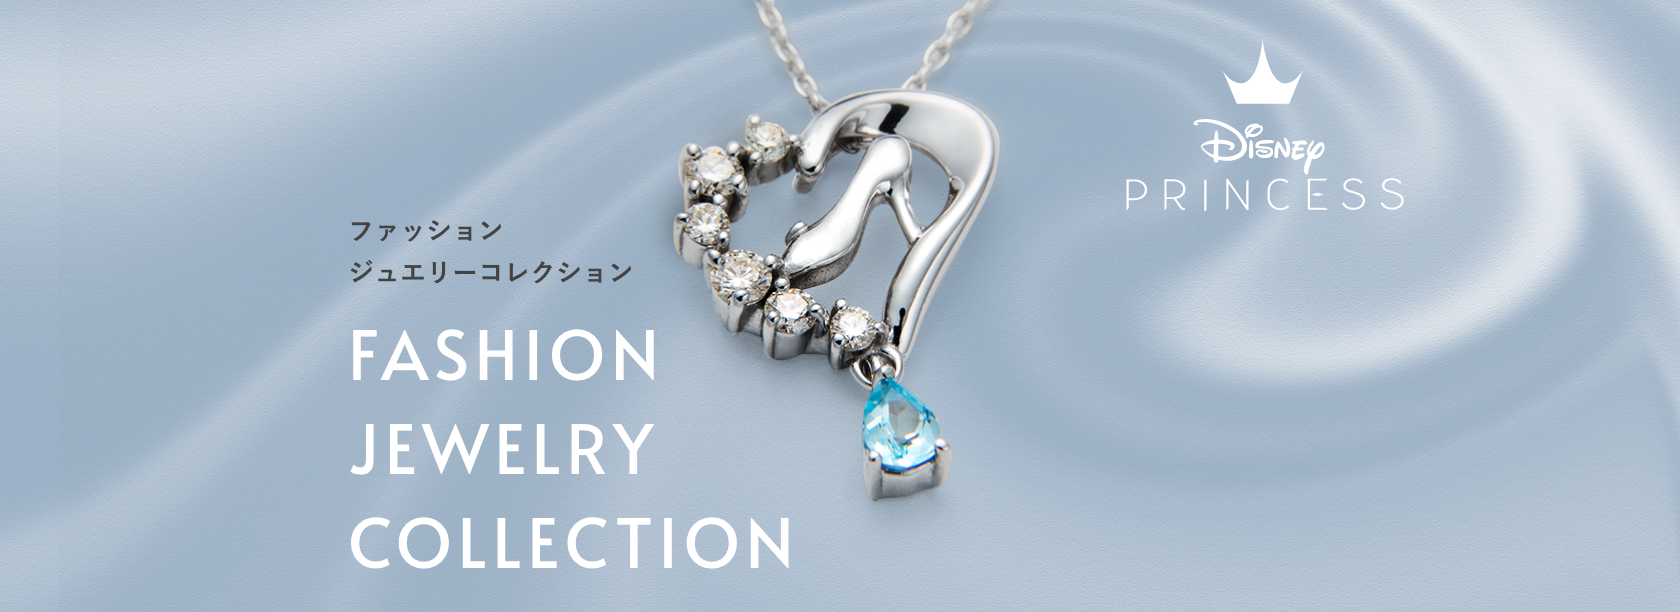 JEWELRY COLLECTION ジュエリーコレクション